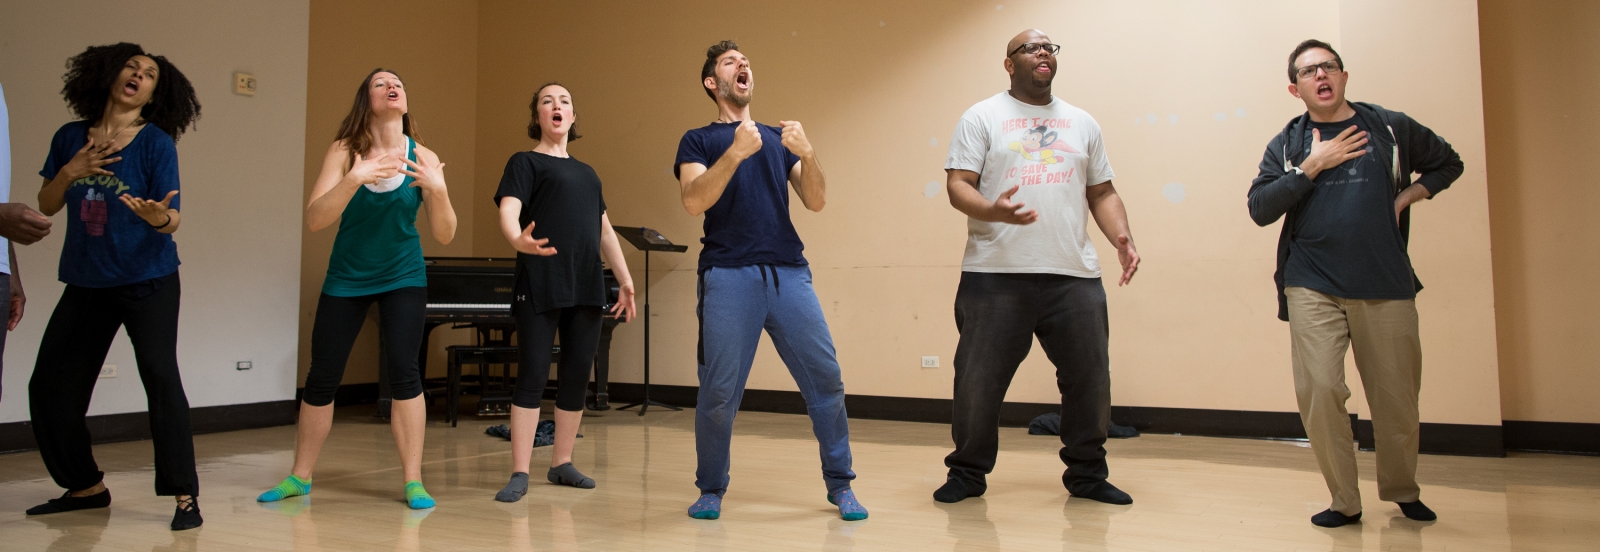 a group of adults practice vocal techniques in Jon Stancato's "Sing a Secret" workshop